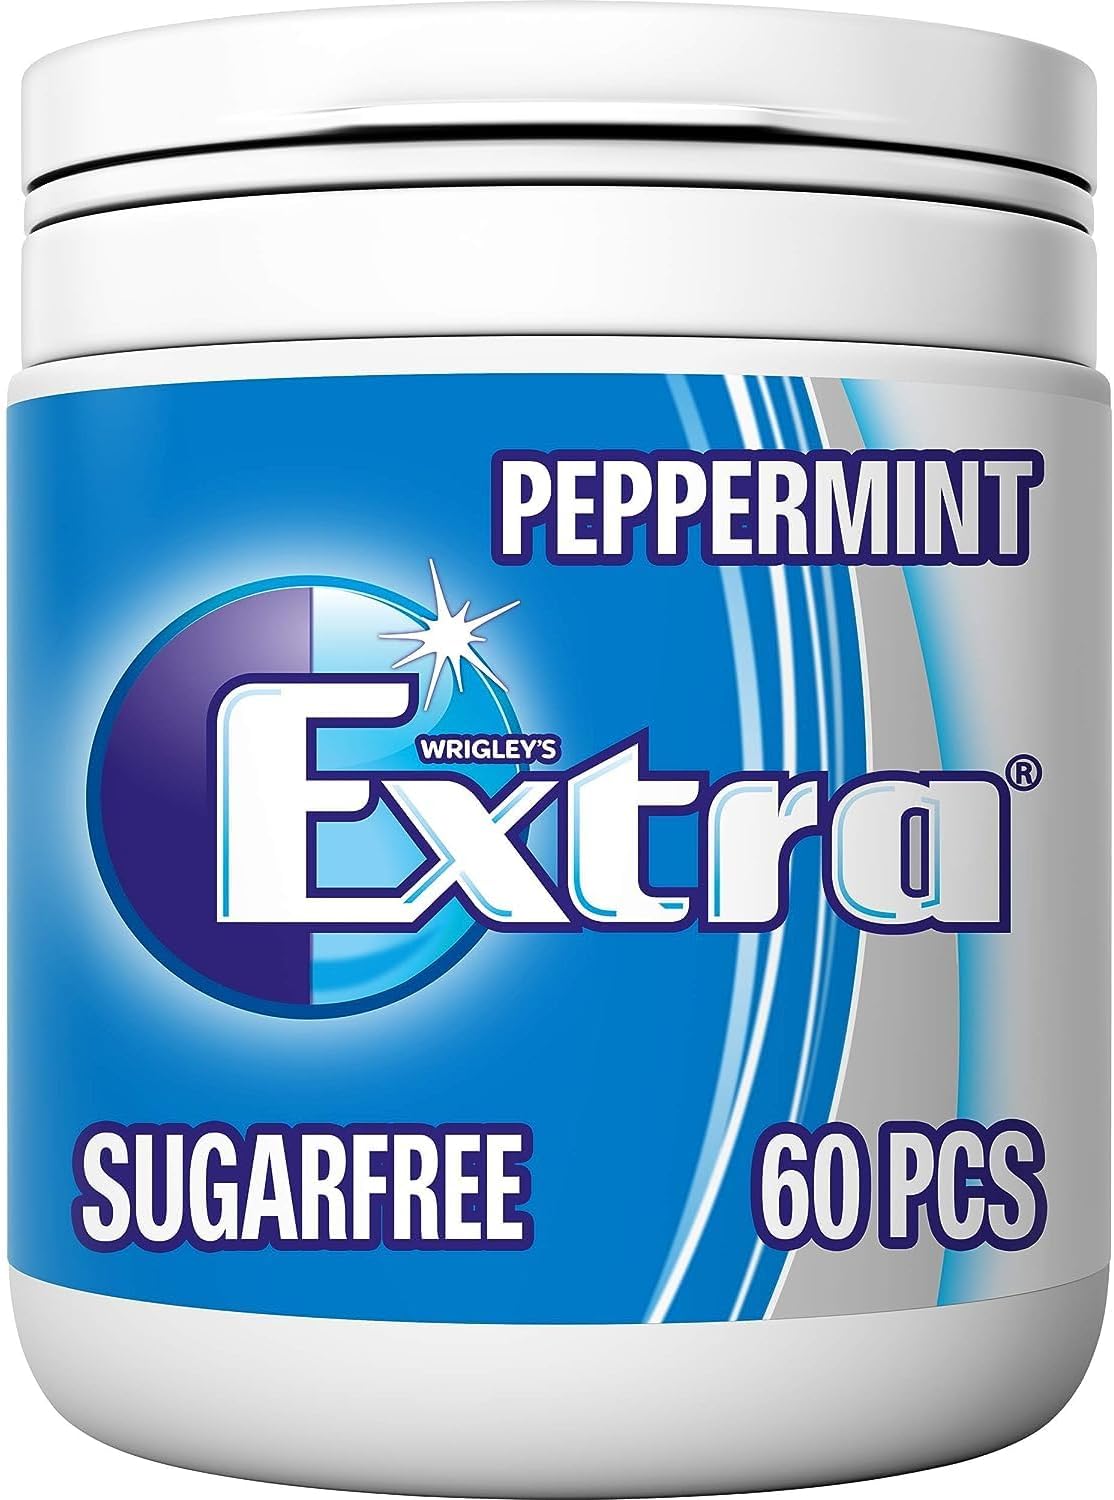 Extra White Chewing Gum Bottle, Sugar Free, Peppermint Flavour, 1 Bottle of 60 Pieces